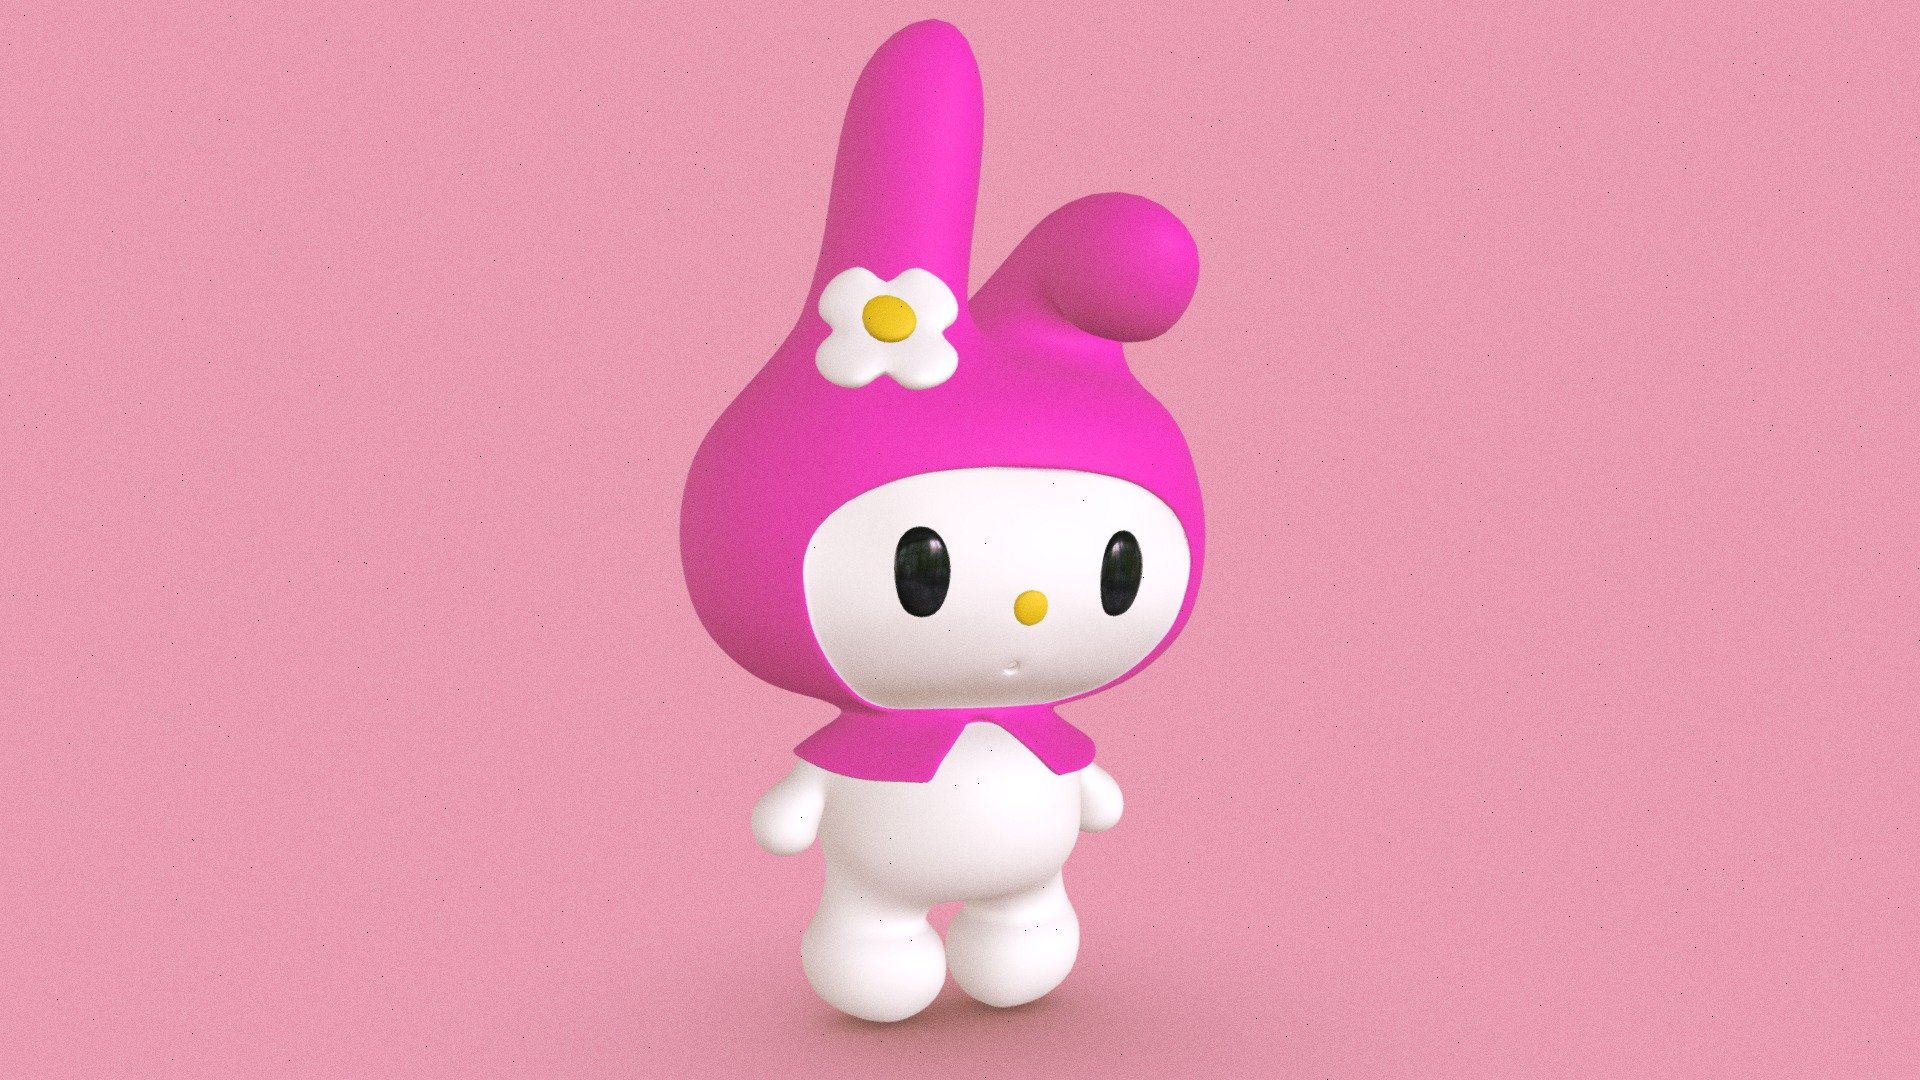 Hi guys!! i modeled a 3d My Melody from Hello Kitty anime. She is a very honest, good-natured girl. Her favorite food is almond pound cake. She was born on January 18th in the magical forest of Mariland, the home to many of her friends.

You can download this model with all the textures included, and of course, if you have any doubt feel free to send me a message!! ^^

(I will publish the time-lapse in my youtube page, stay tuned!)

❤️ Visit all my links for more works: https://linktr.ee/yukitori - My Melody 🌼 - Buy Royalty Free 3D model by YukiTori 3d model